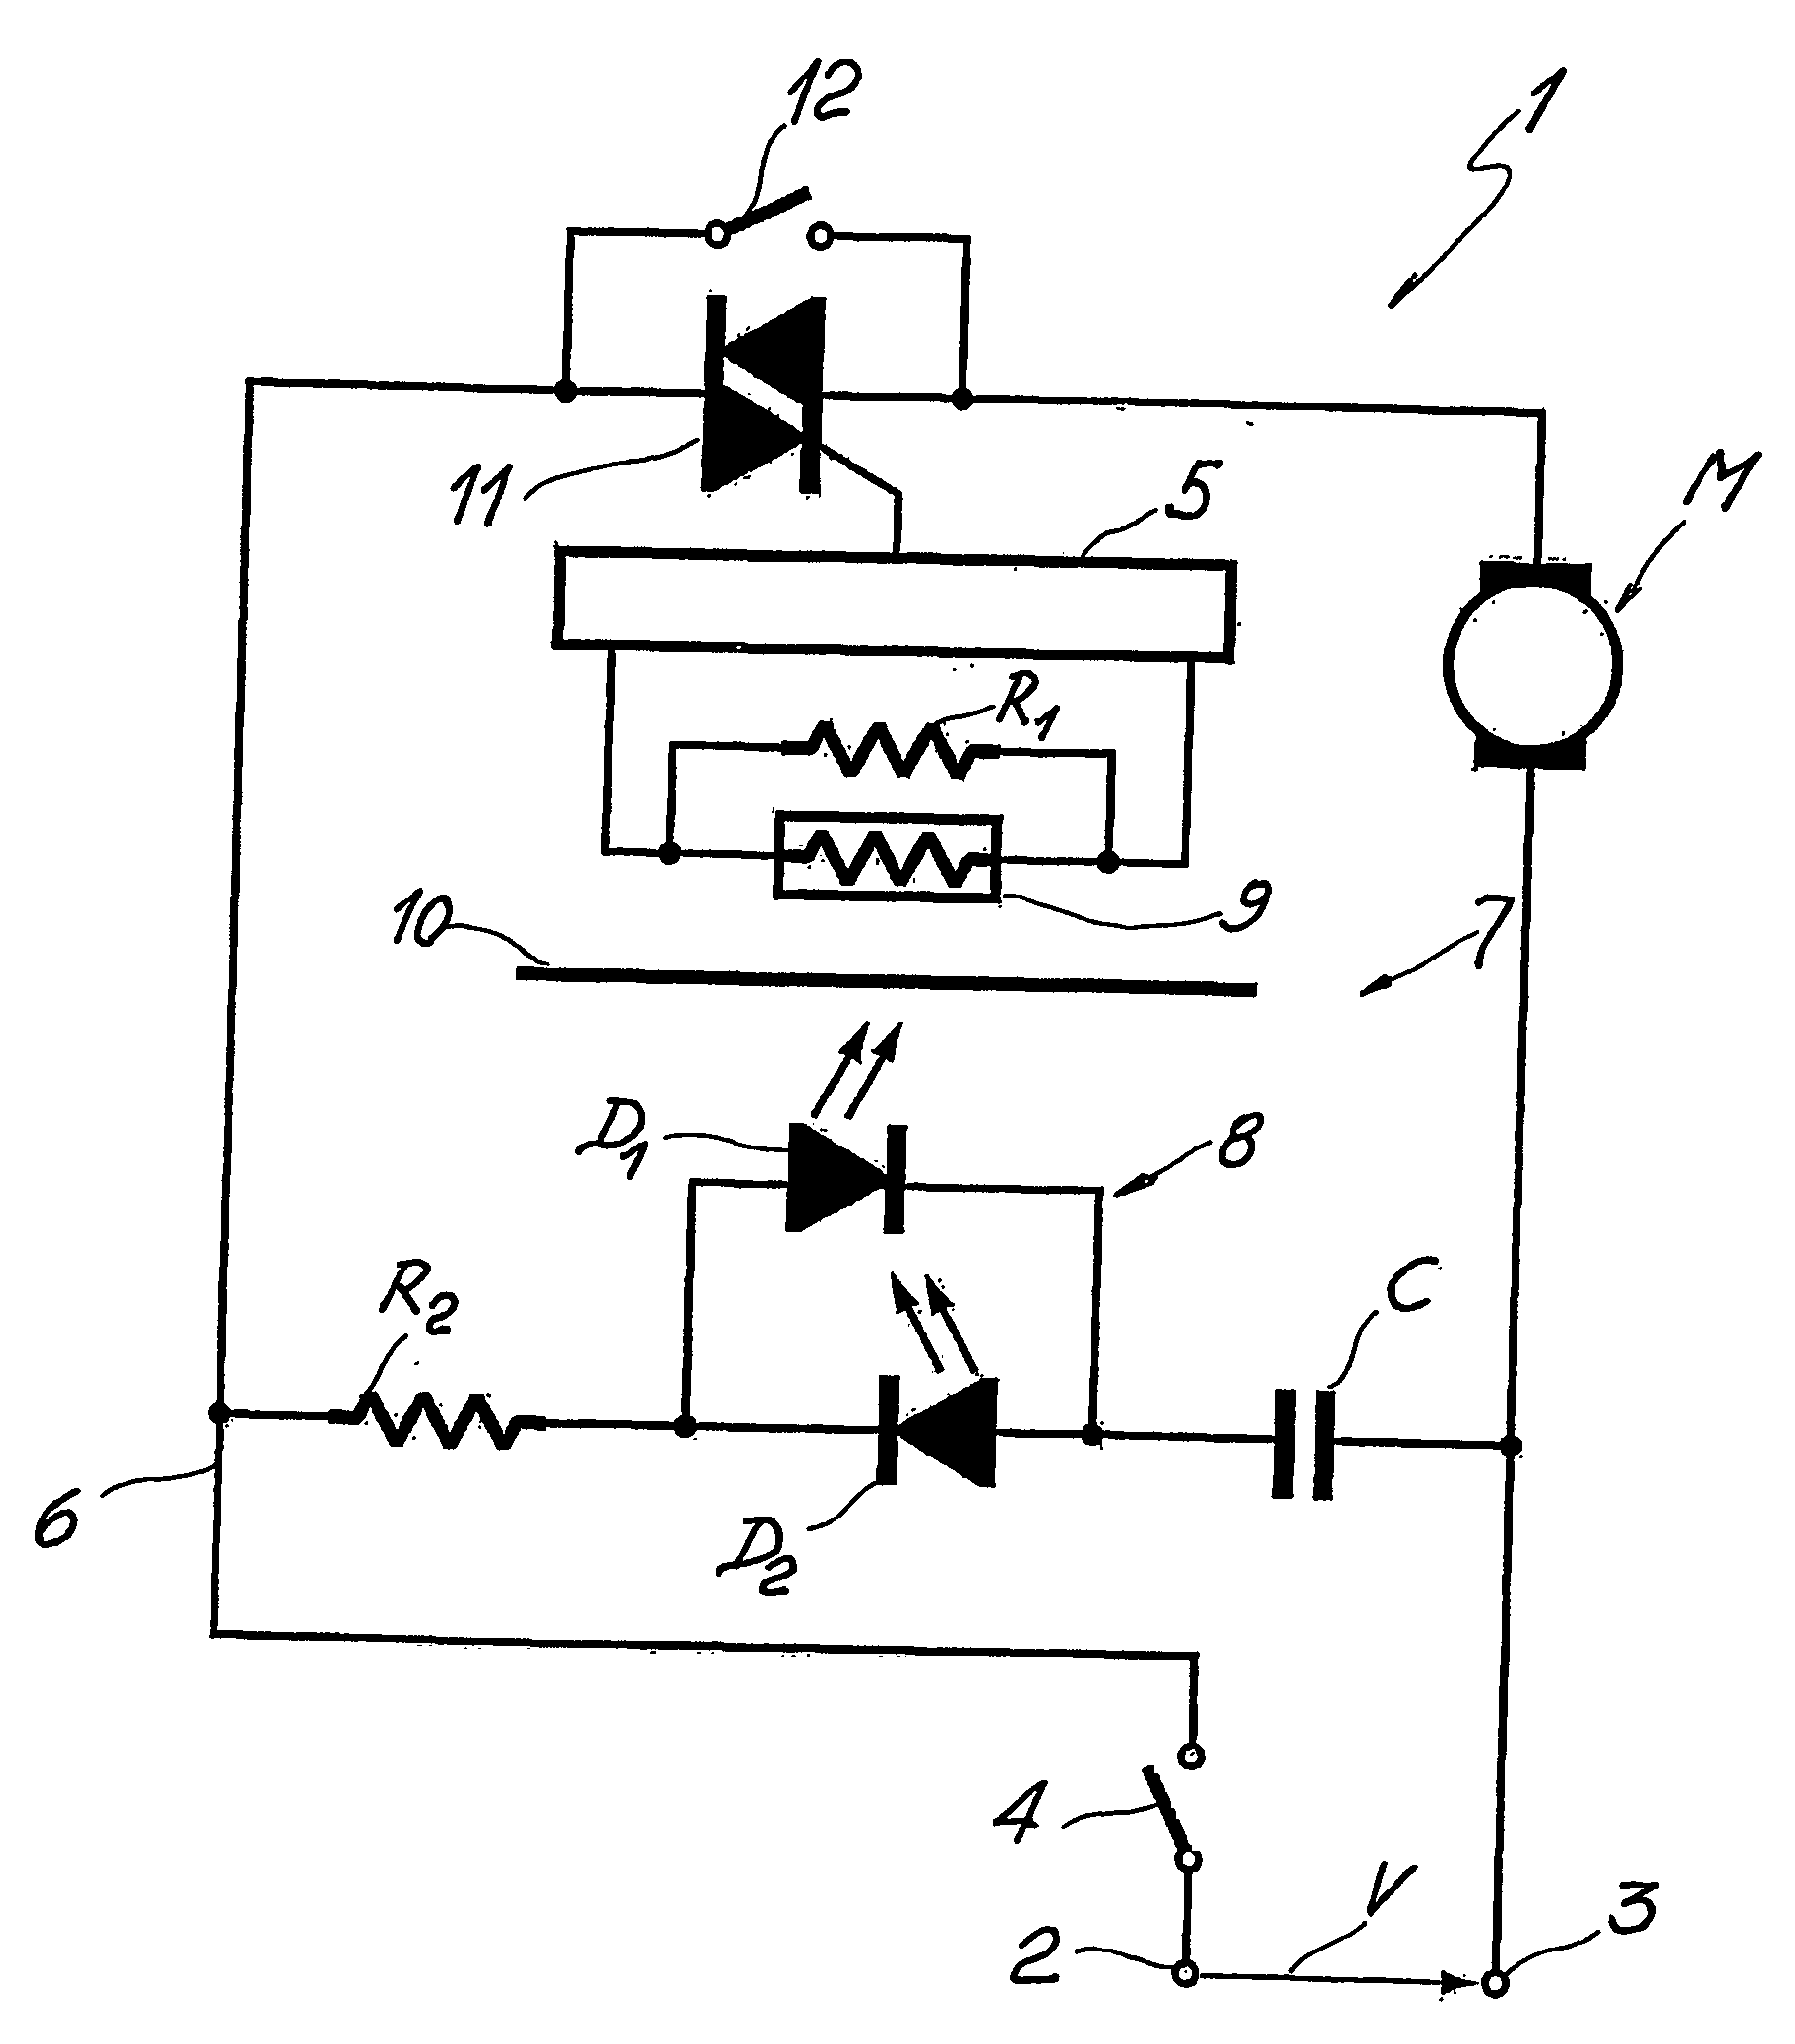 Control device for variable speed electric motors, particularly for power tools